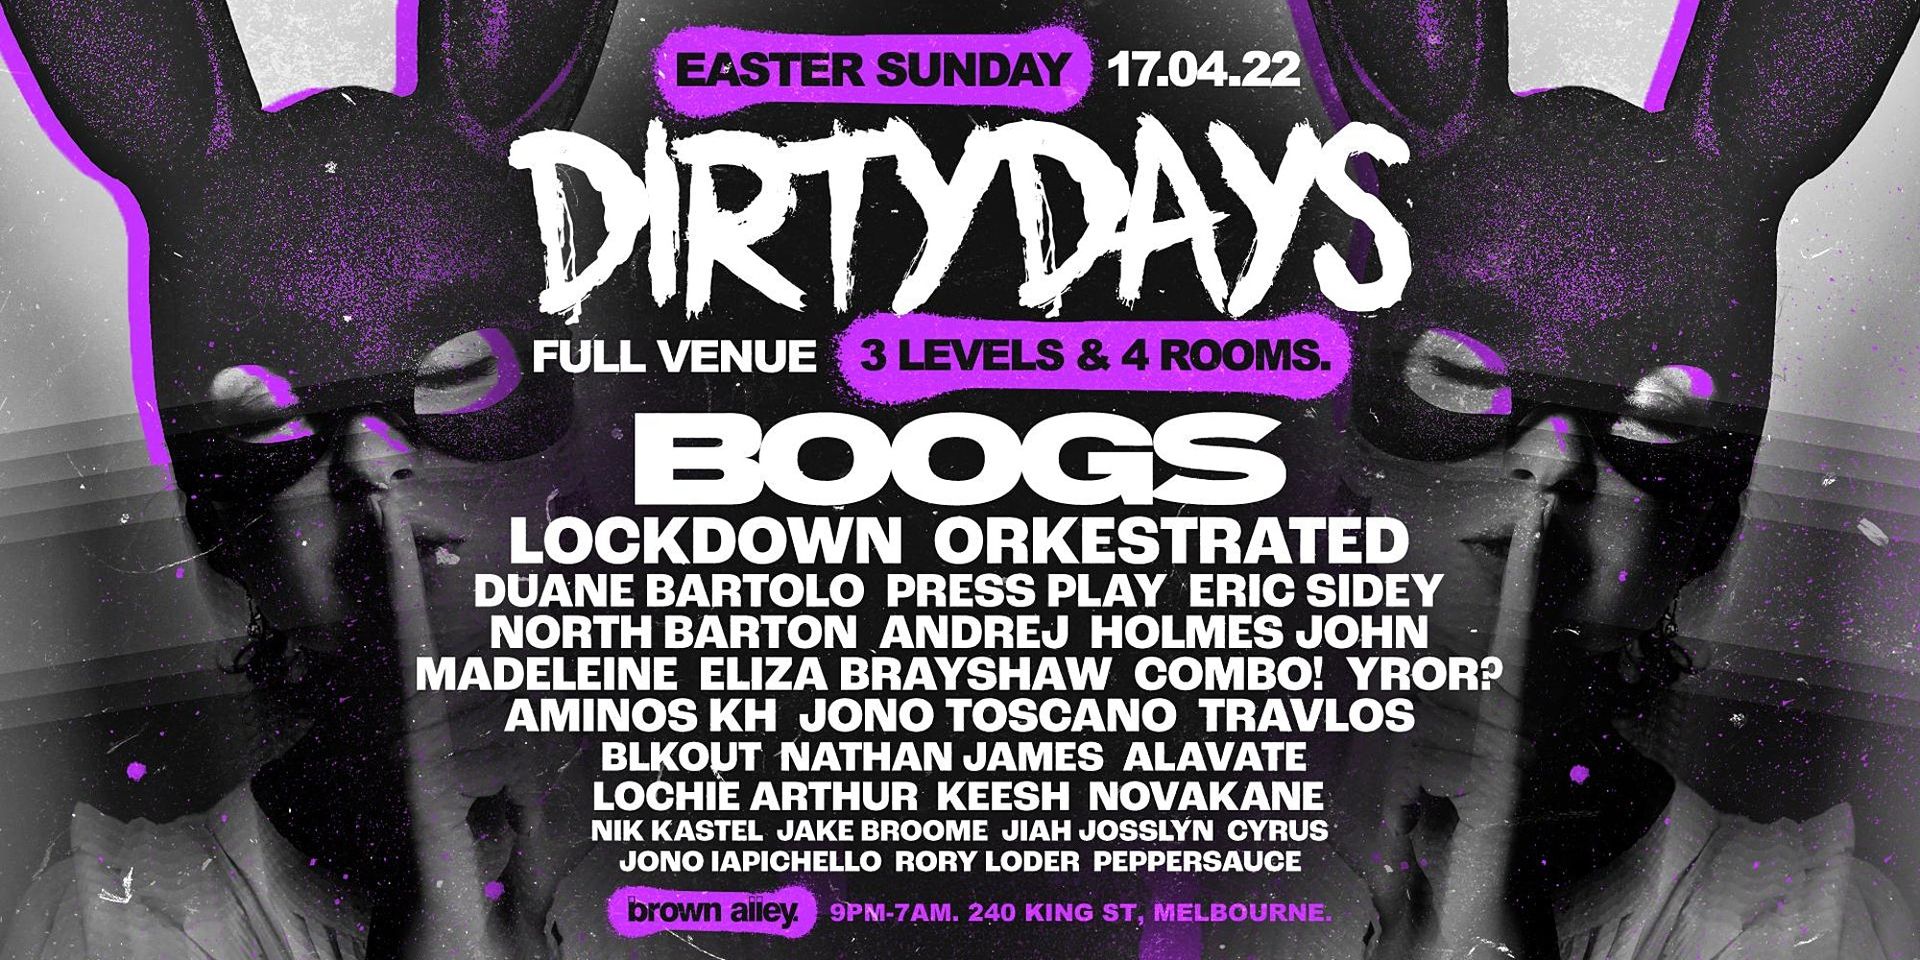 DIRTY DAYS - EASTER SUNDAY FT BOOGS